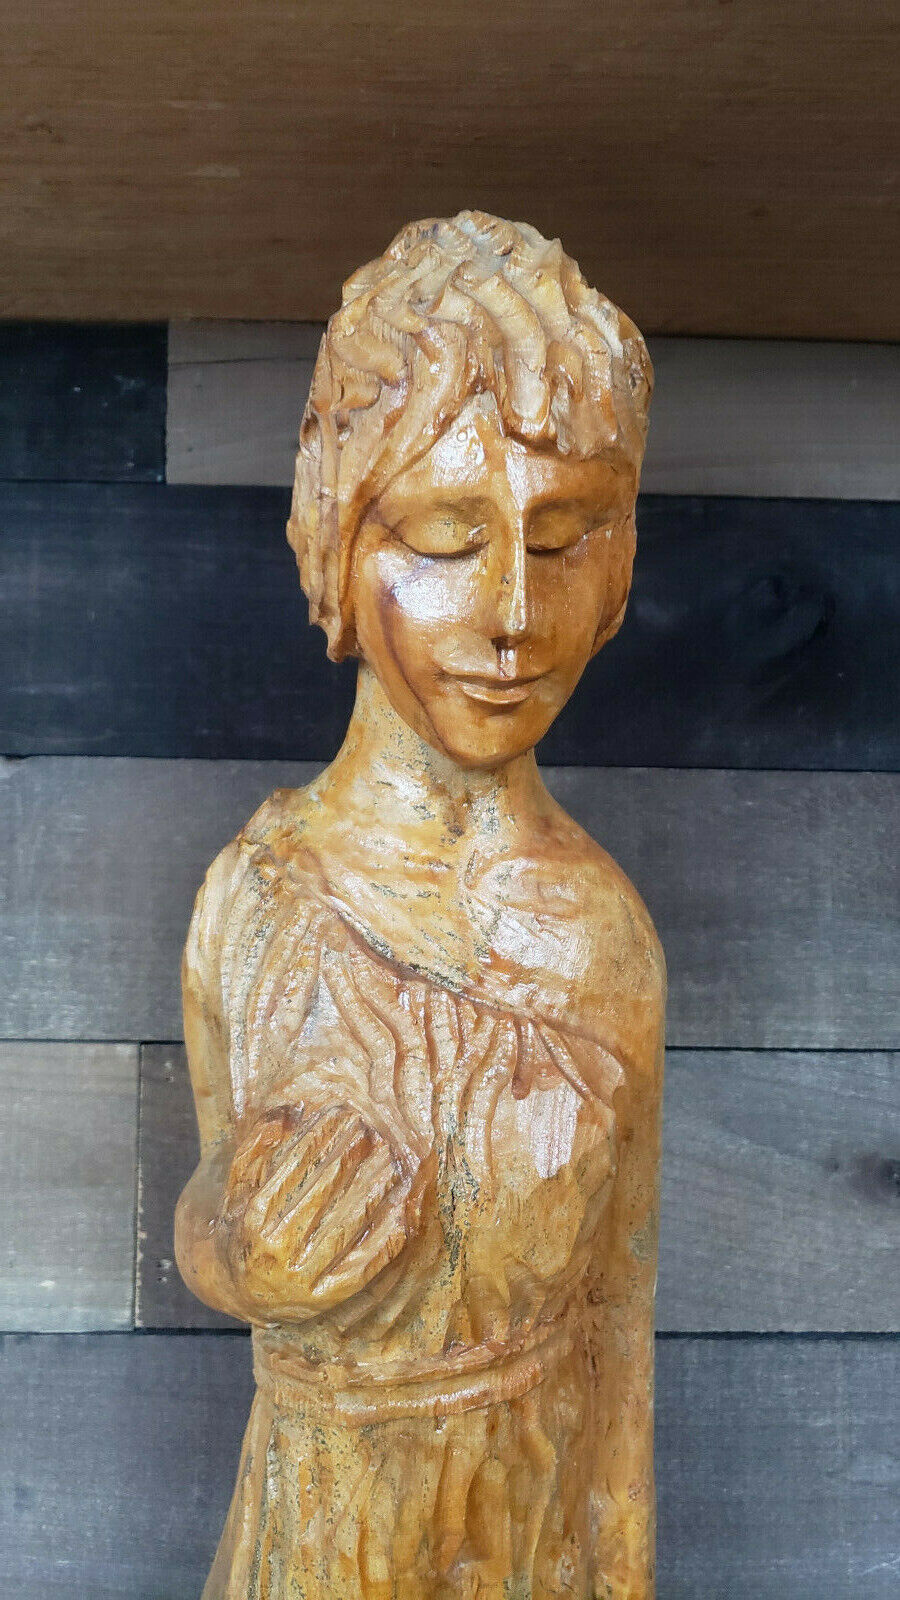 Rare Vintage Handcarved Wooden Statue of a Woman Holding Her Breast. 34" Без бренда - фотография #6